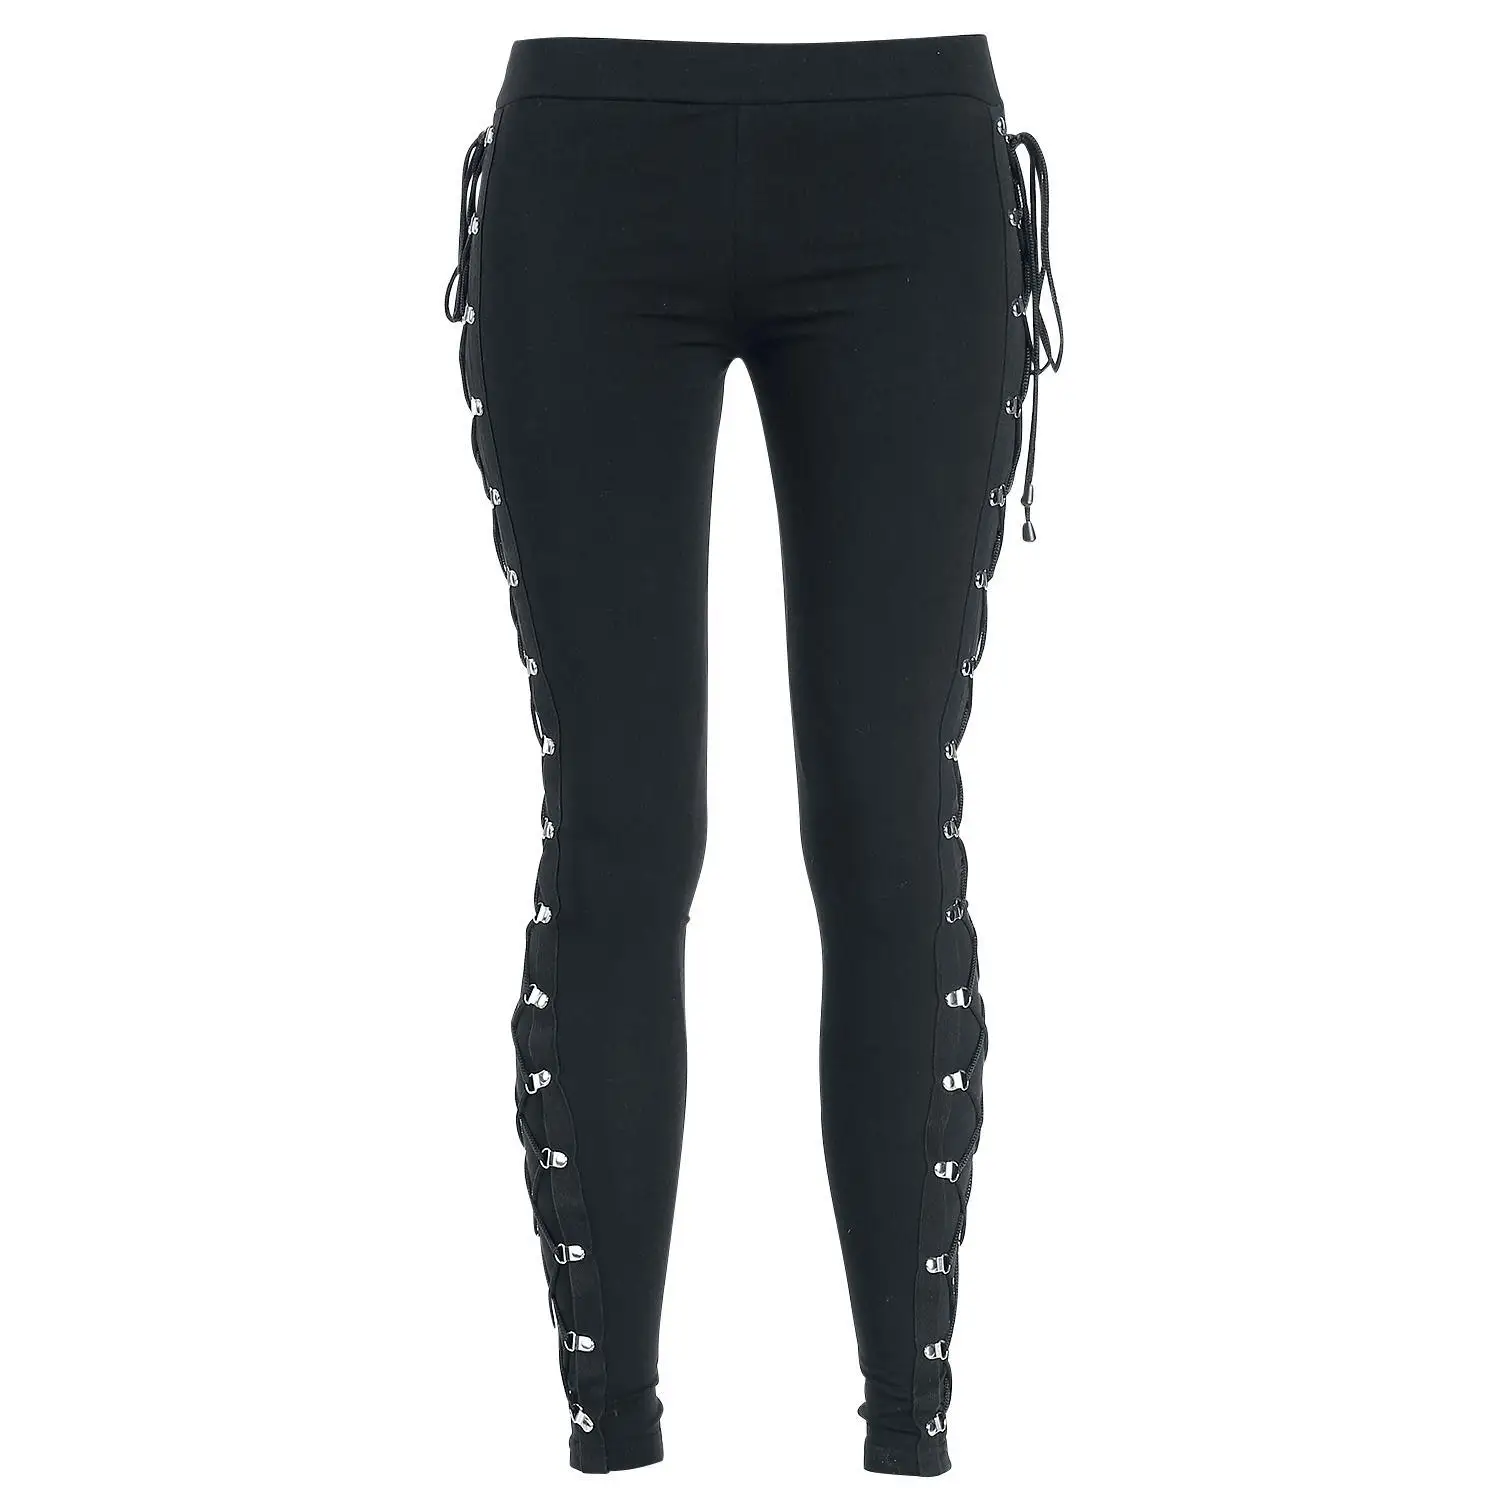 New Trousers Women Tight-fitting High-elastic Versatile Lace-up Leggings Casual Pants for Women